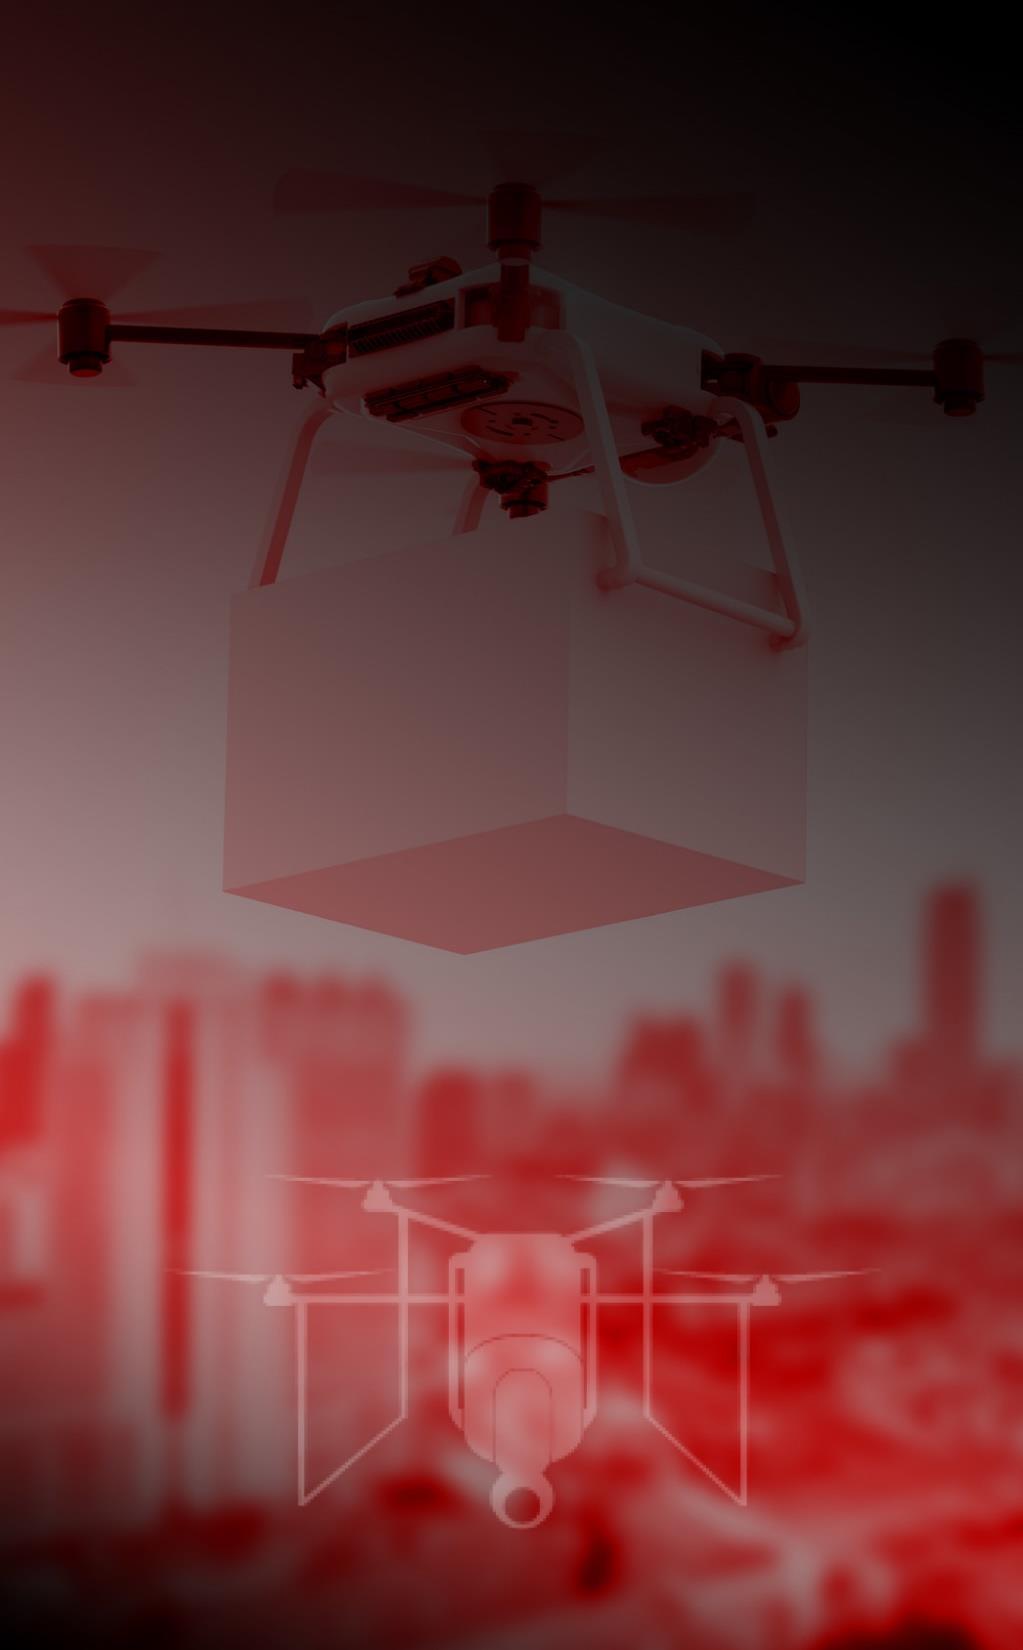 To find out more about the work on drones at the GSMA, and